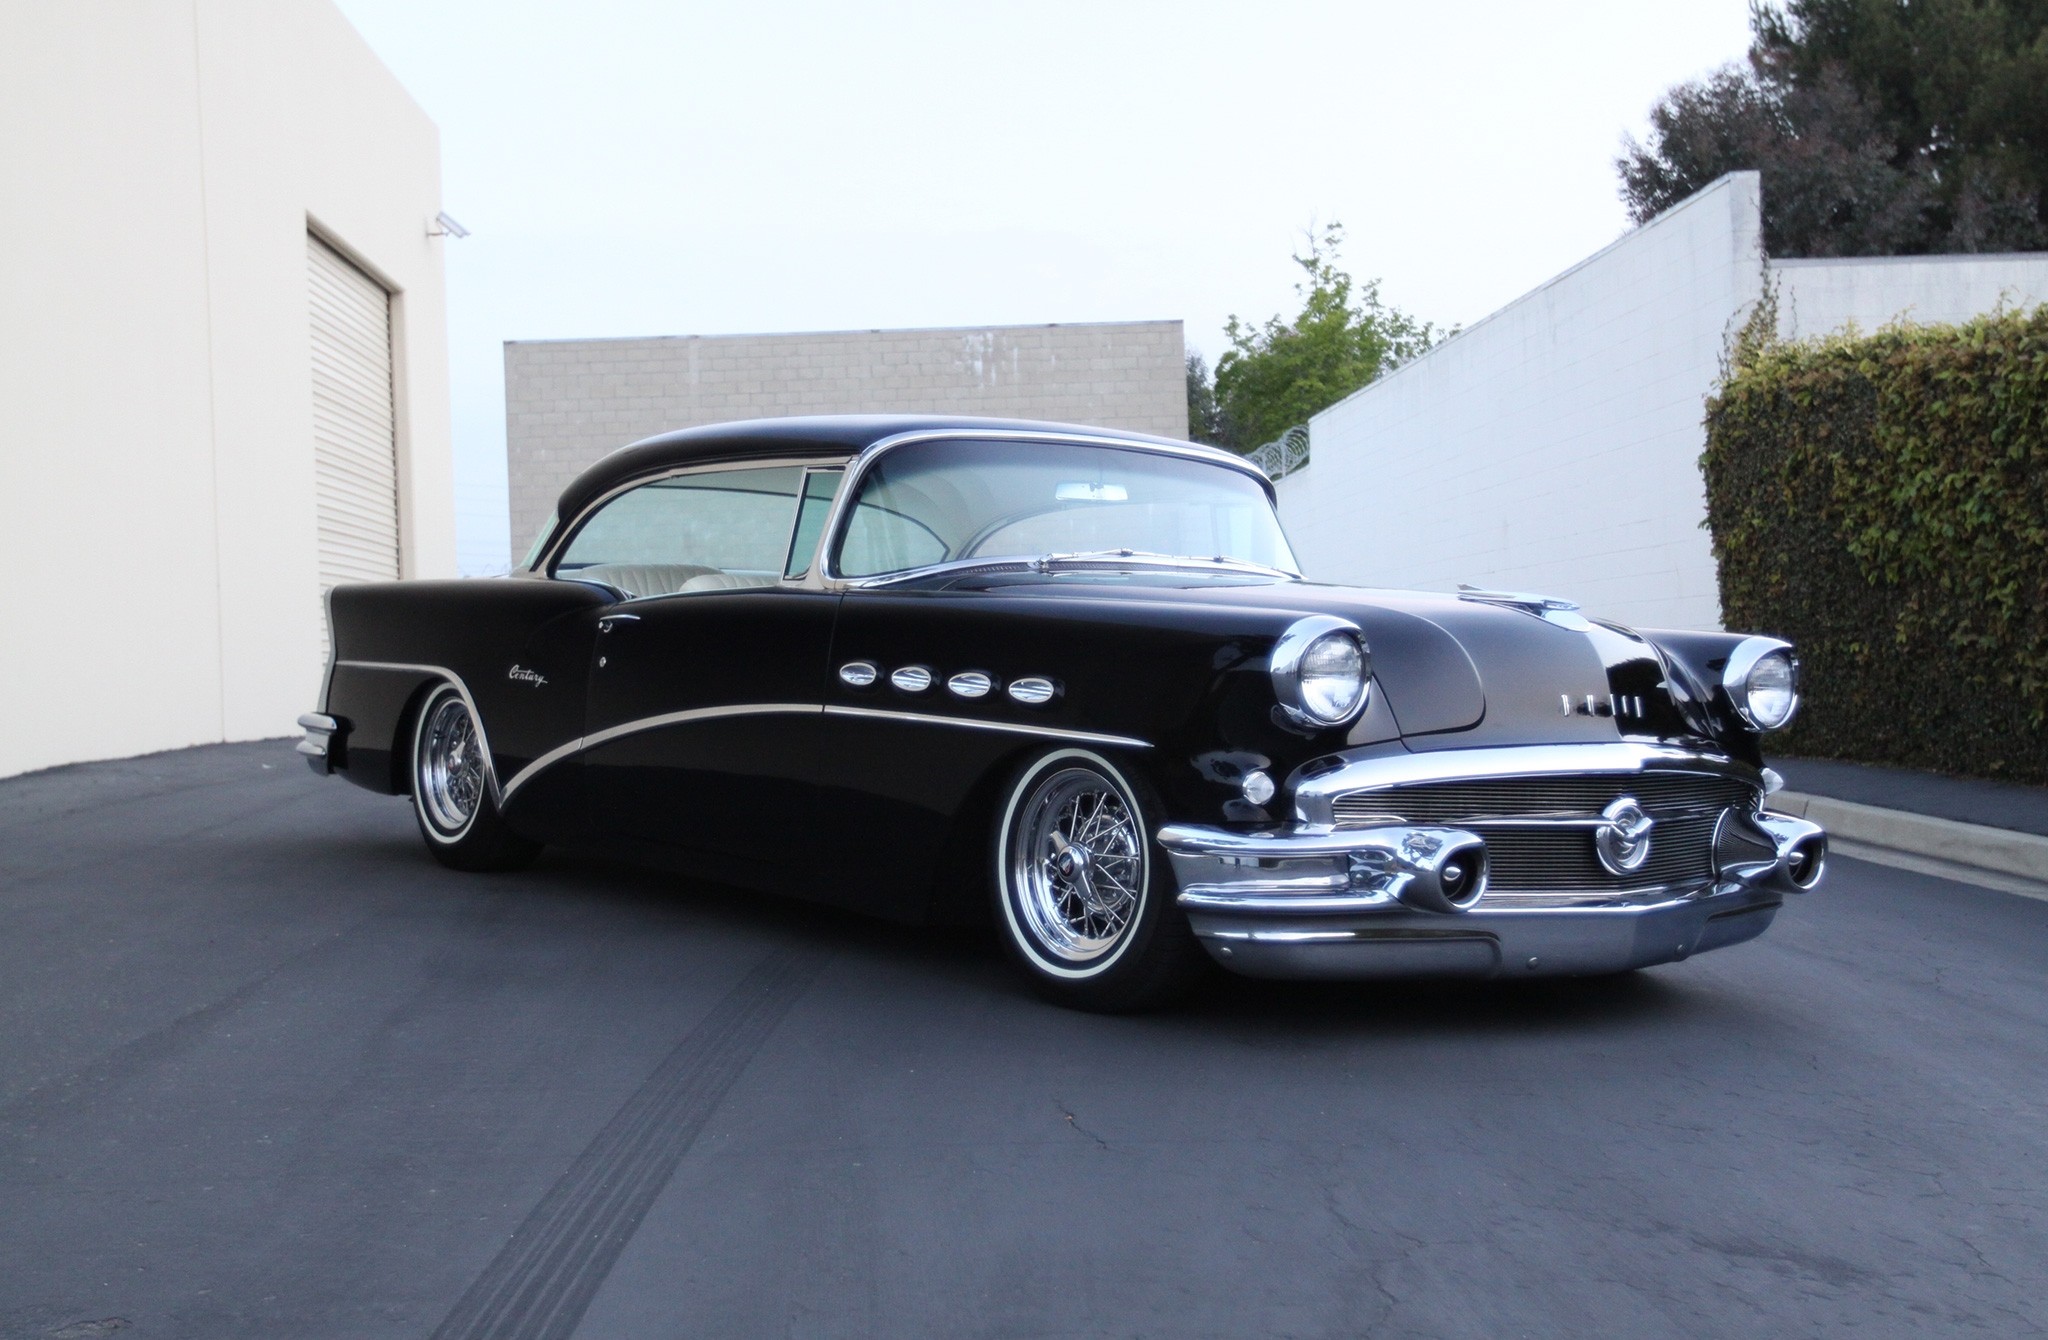 74441 download wallpaper auto, cars, vintage, side view, 1956 buick century screensavers and pictures for free